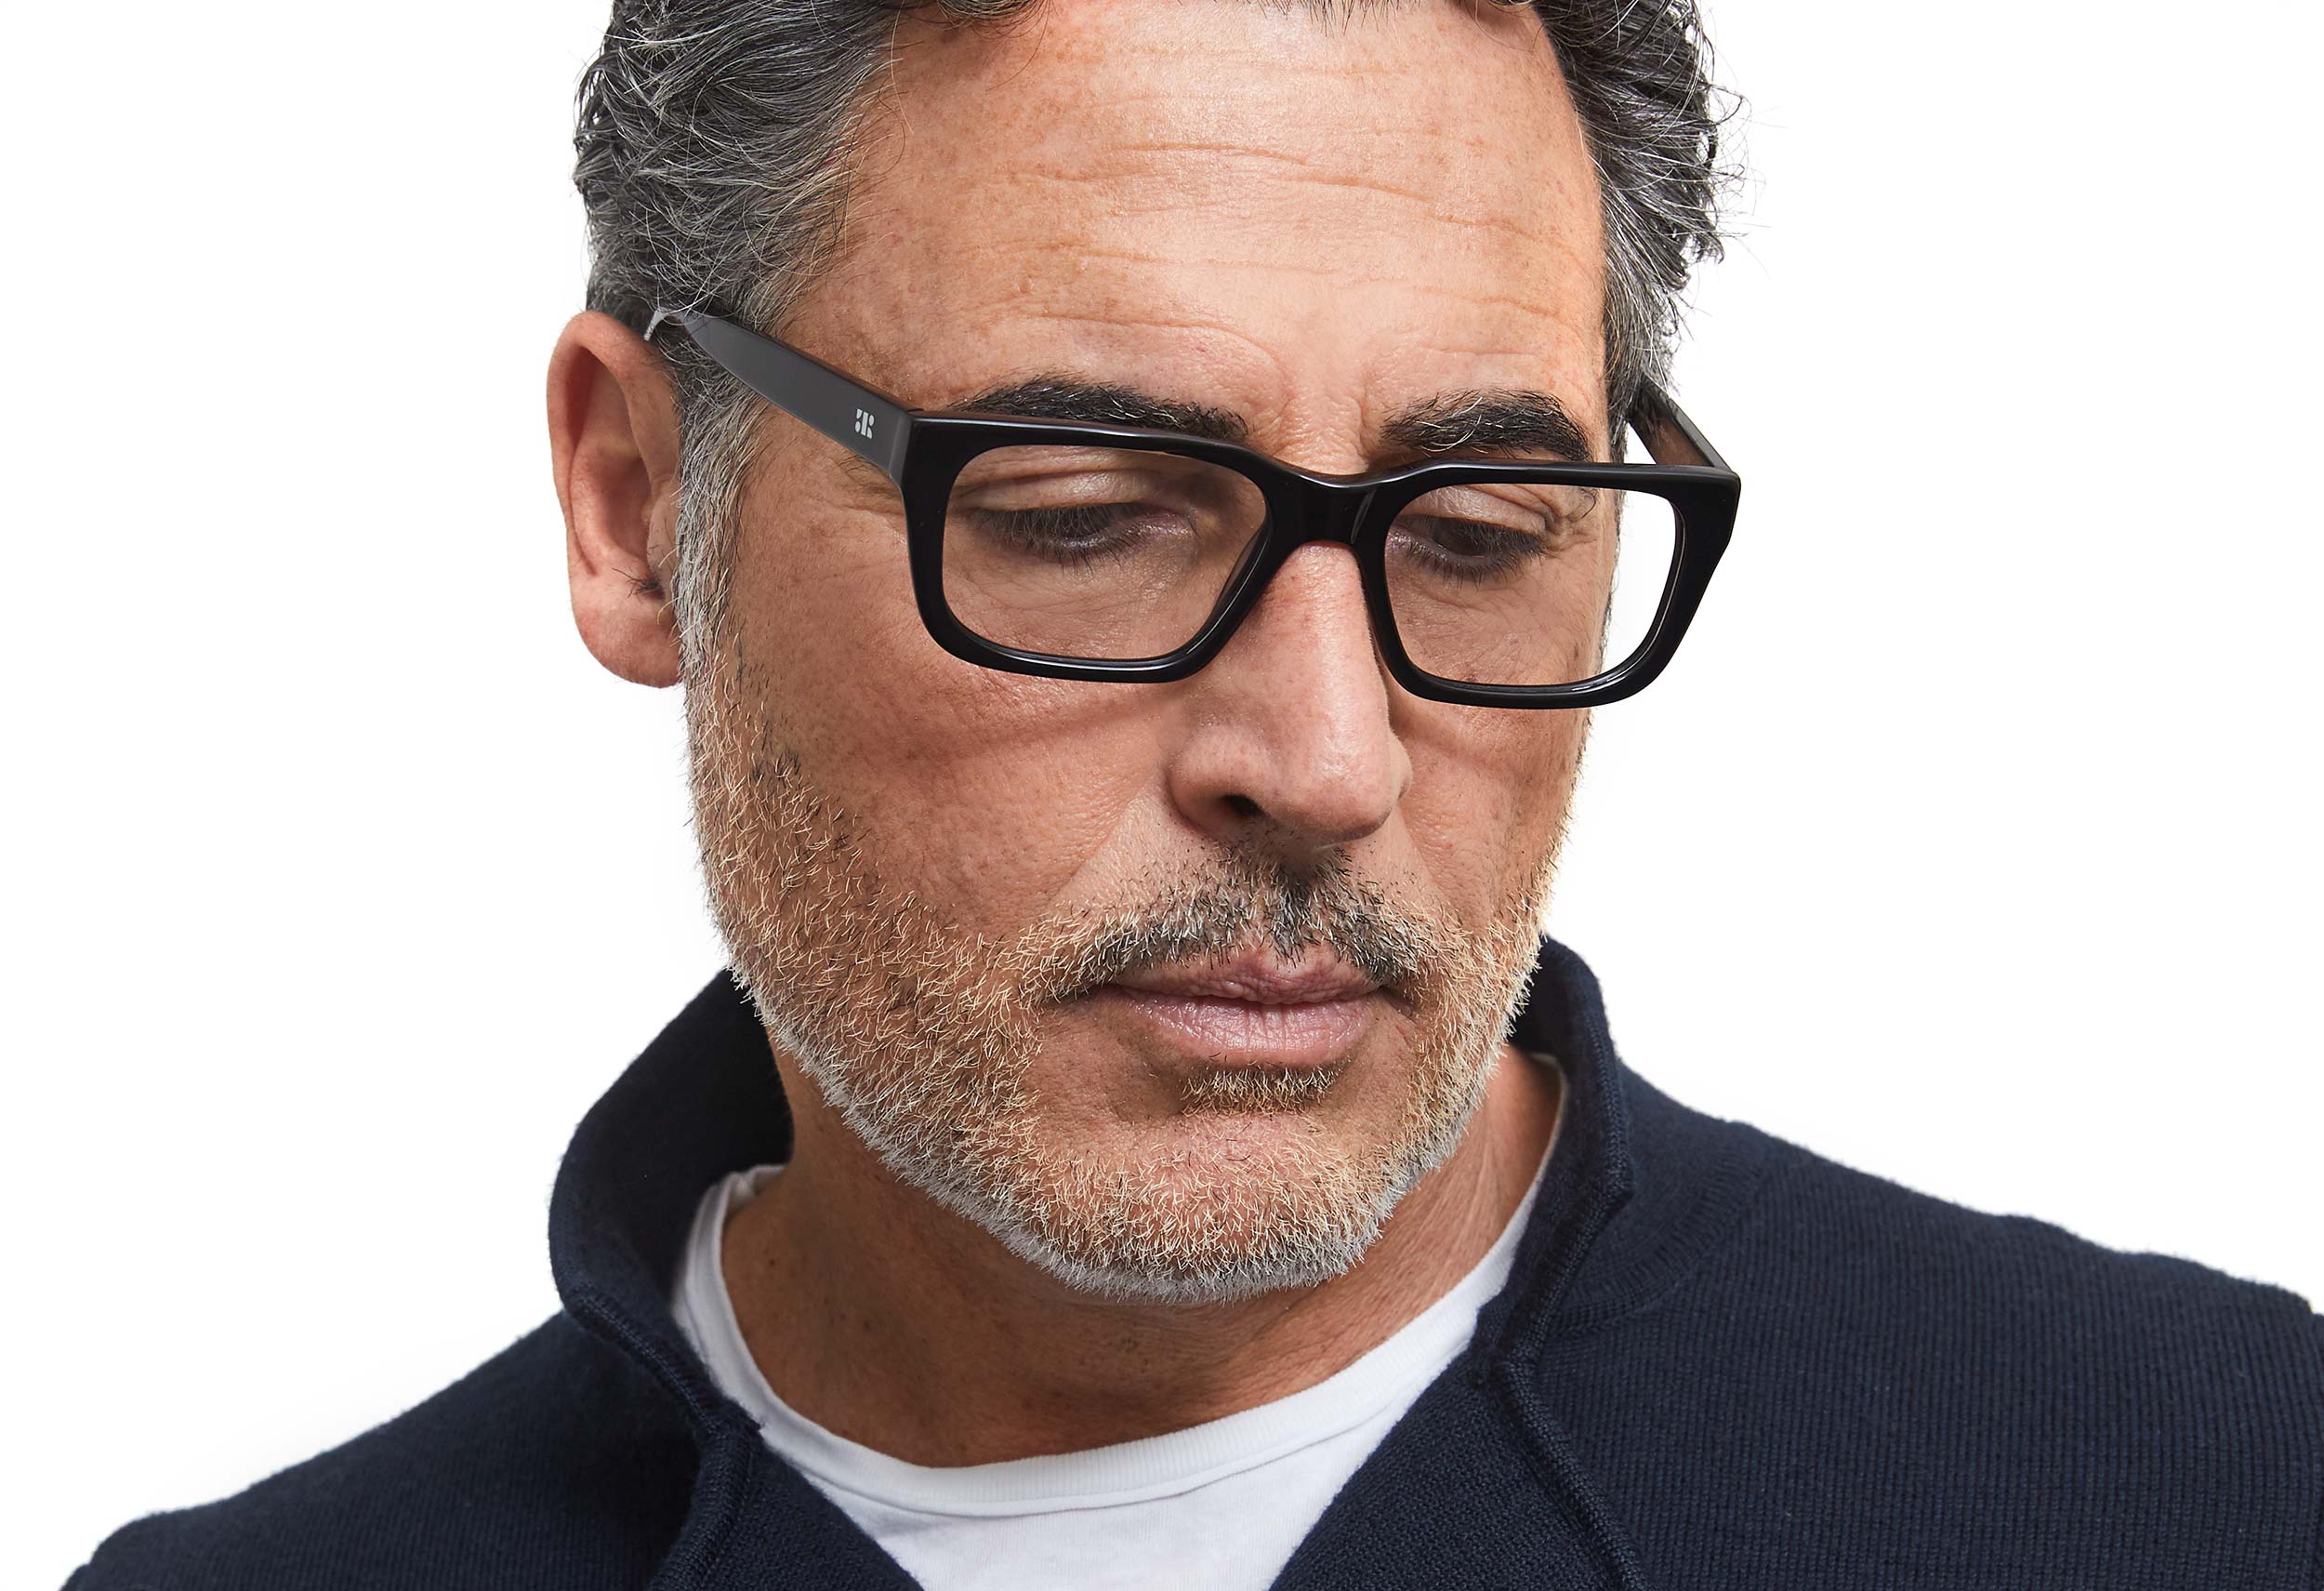 Photo of a man or woman wearing Victoire Black & Tortoise Reading Glasses by French Kiwis